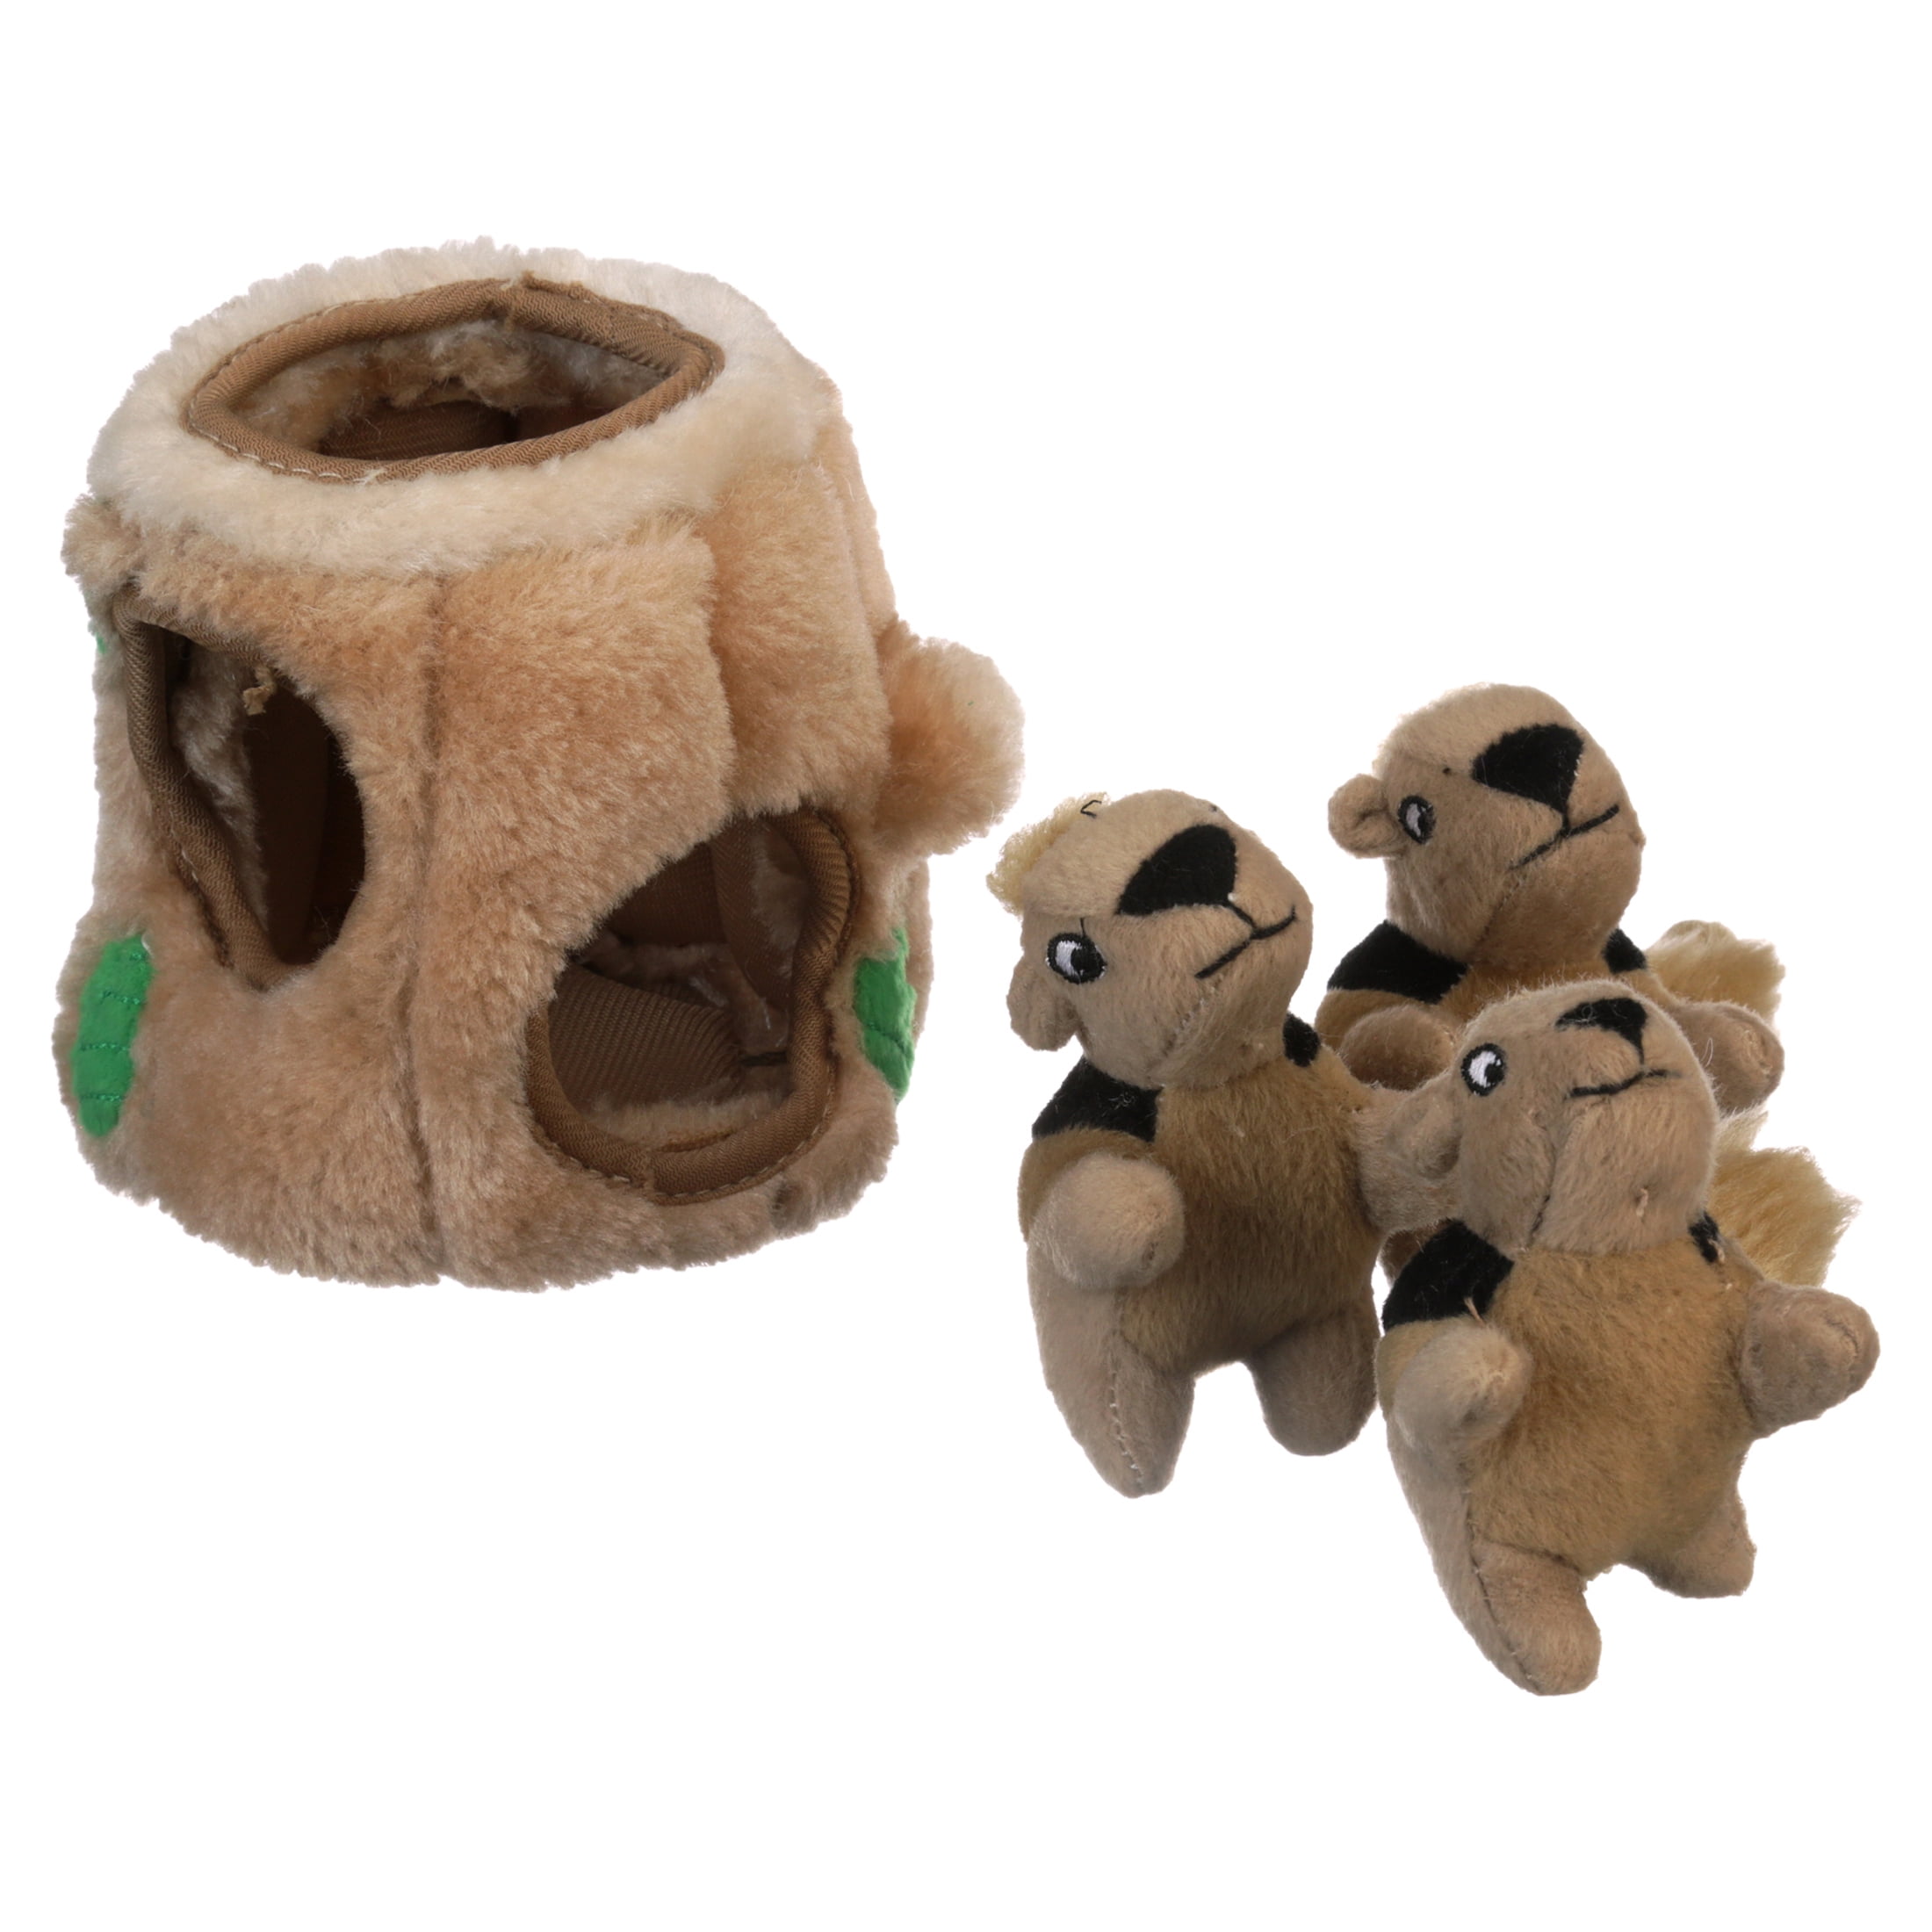 Outward Hound Hide a Squirrel Plush Dog Toy Puzzle, Brown, Large – KOL PET